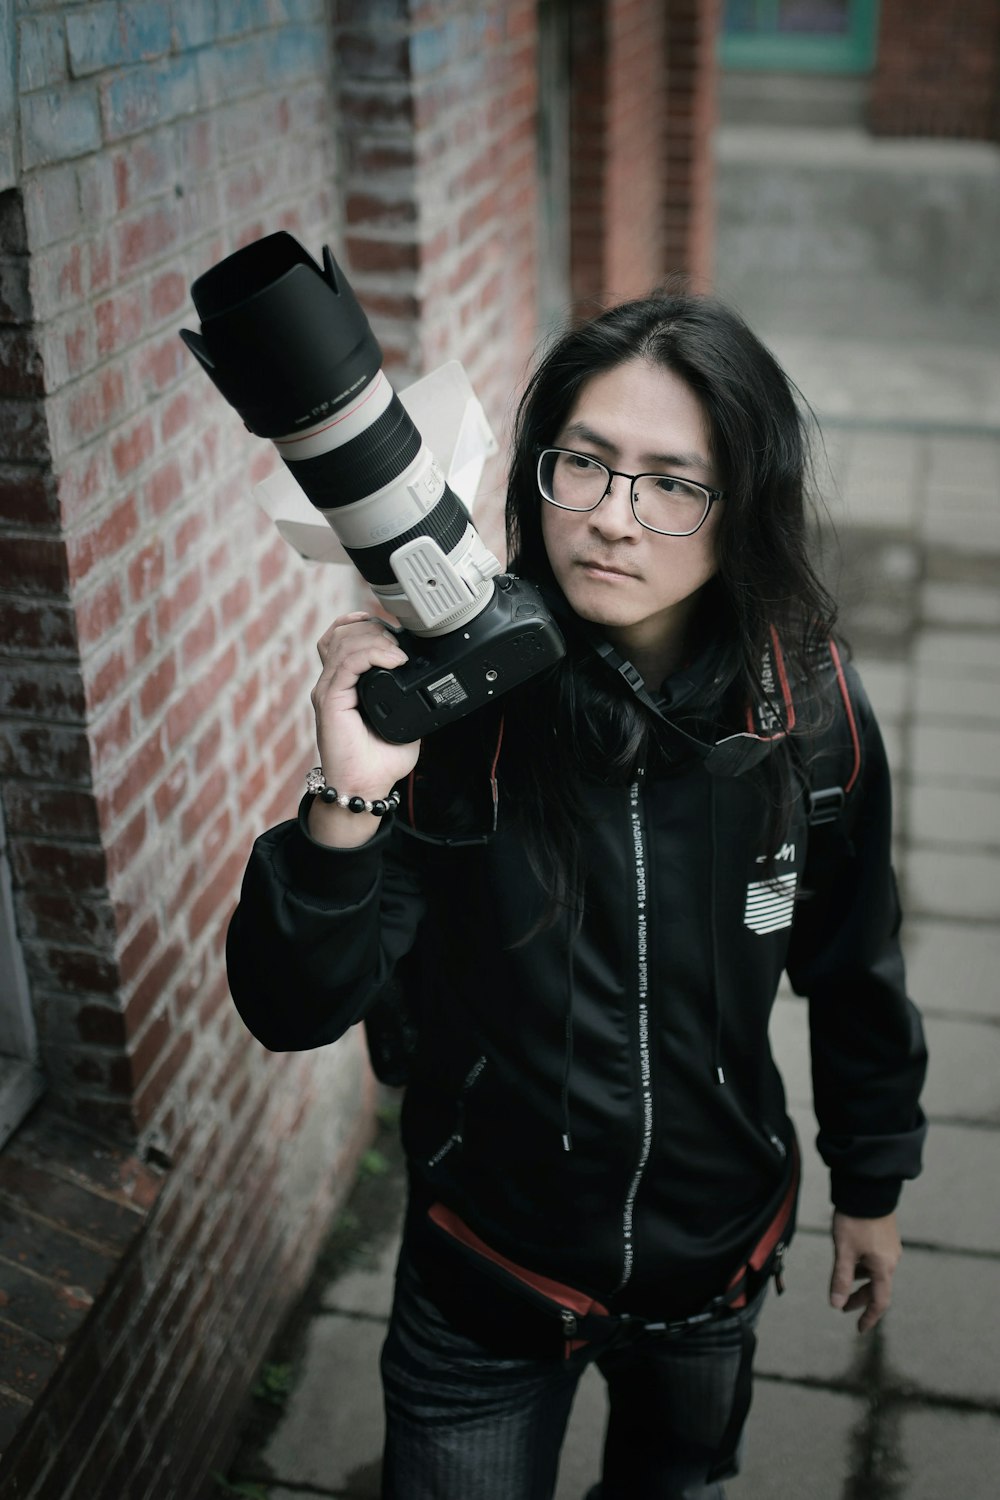 woman in black jacket holding black and white dslr camera